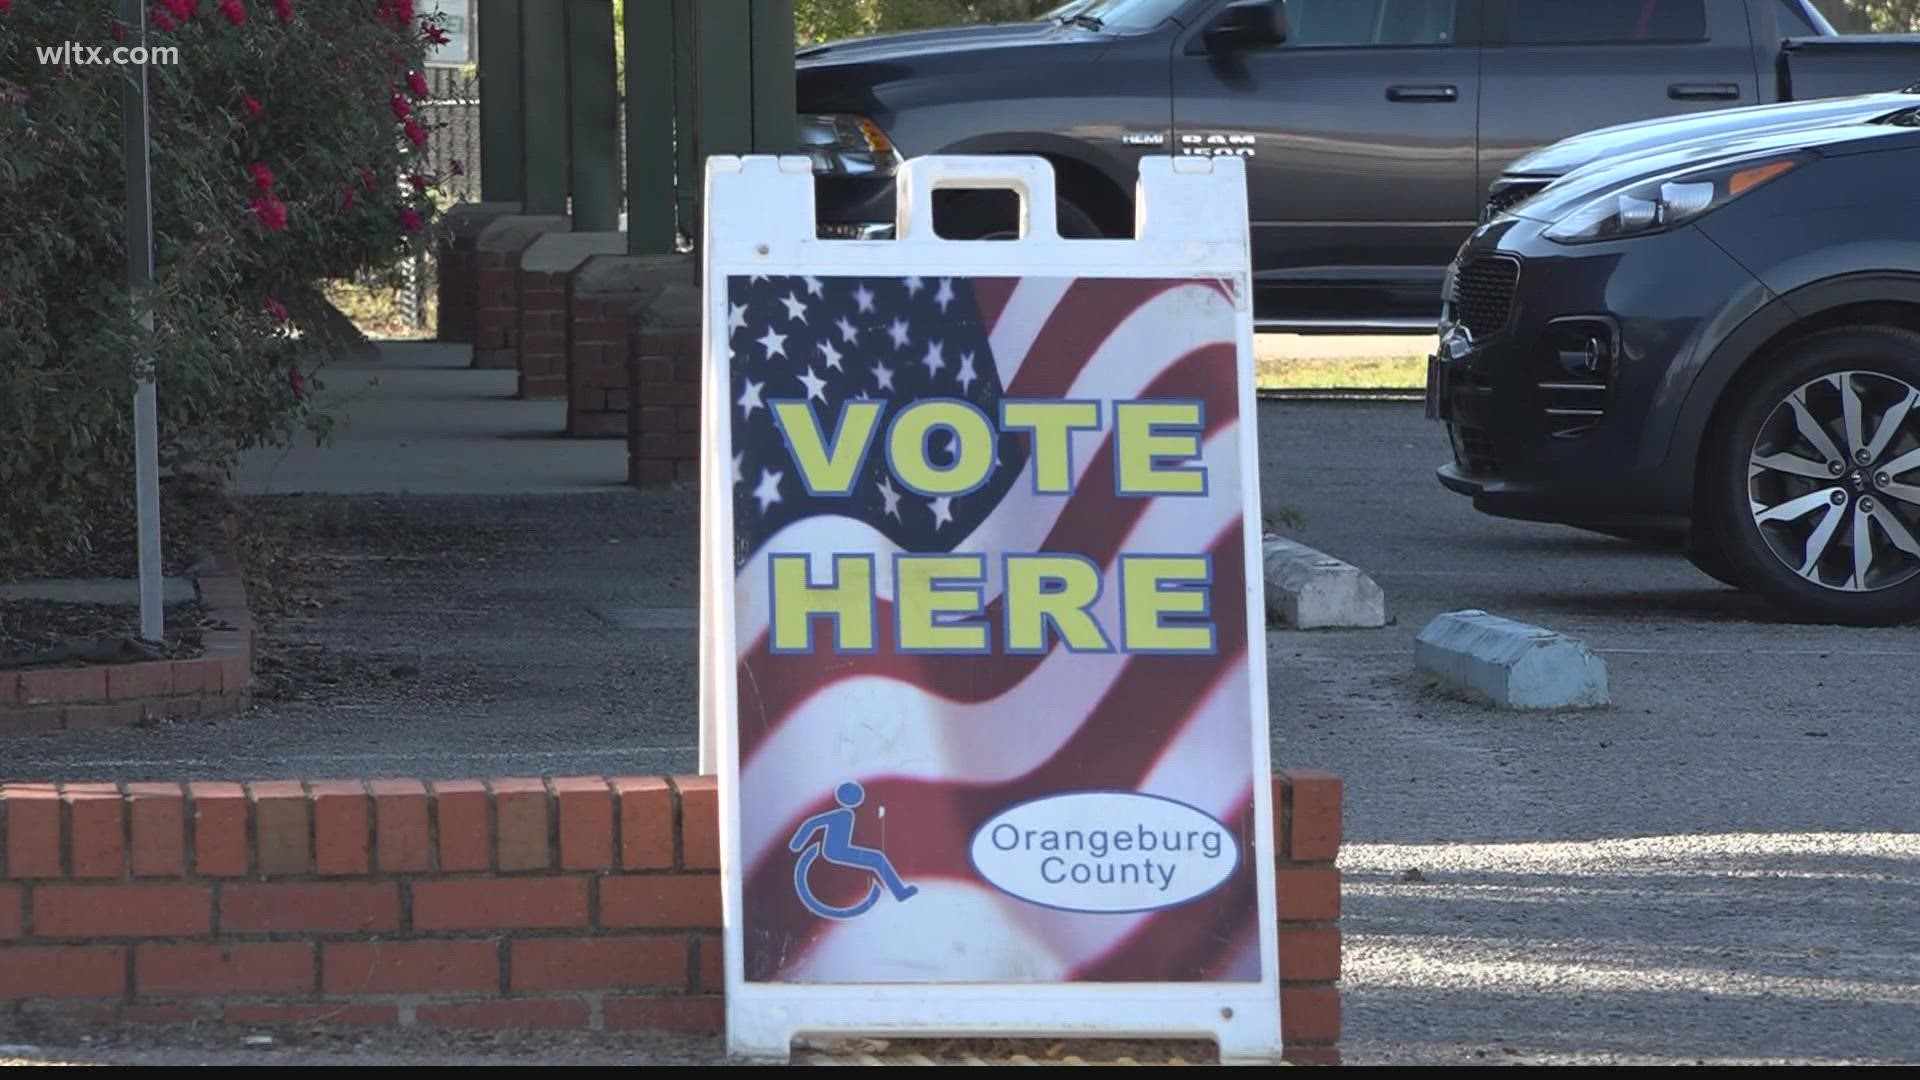 Orangeburg county is holding 14 elections, residents will decide on several council and mayor seats.